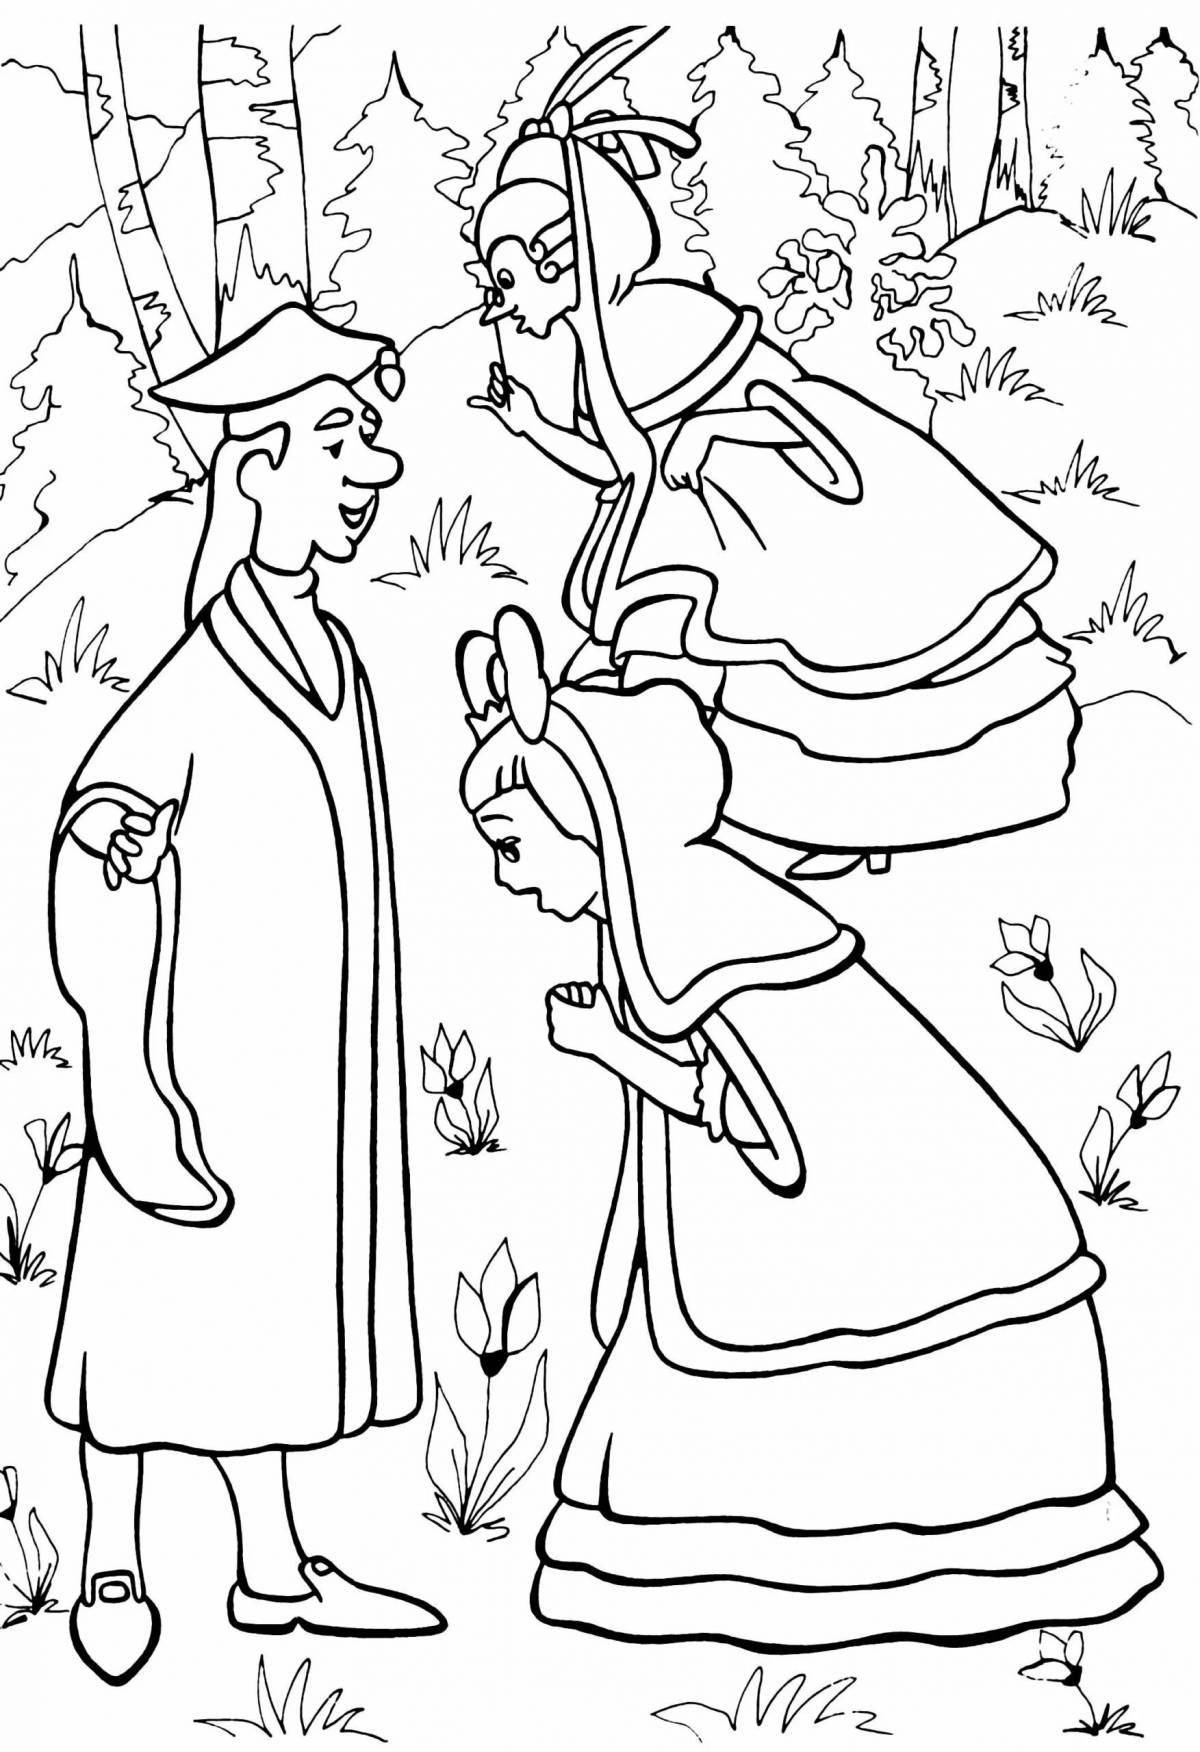 Creative coloring page 12